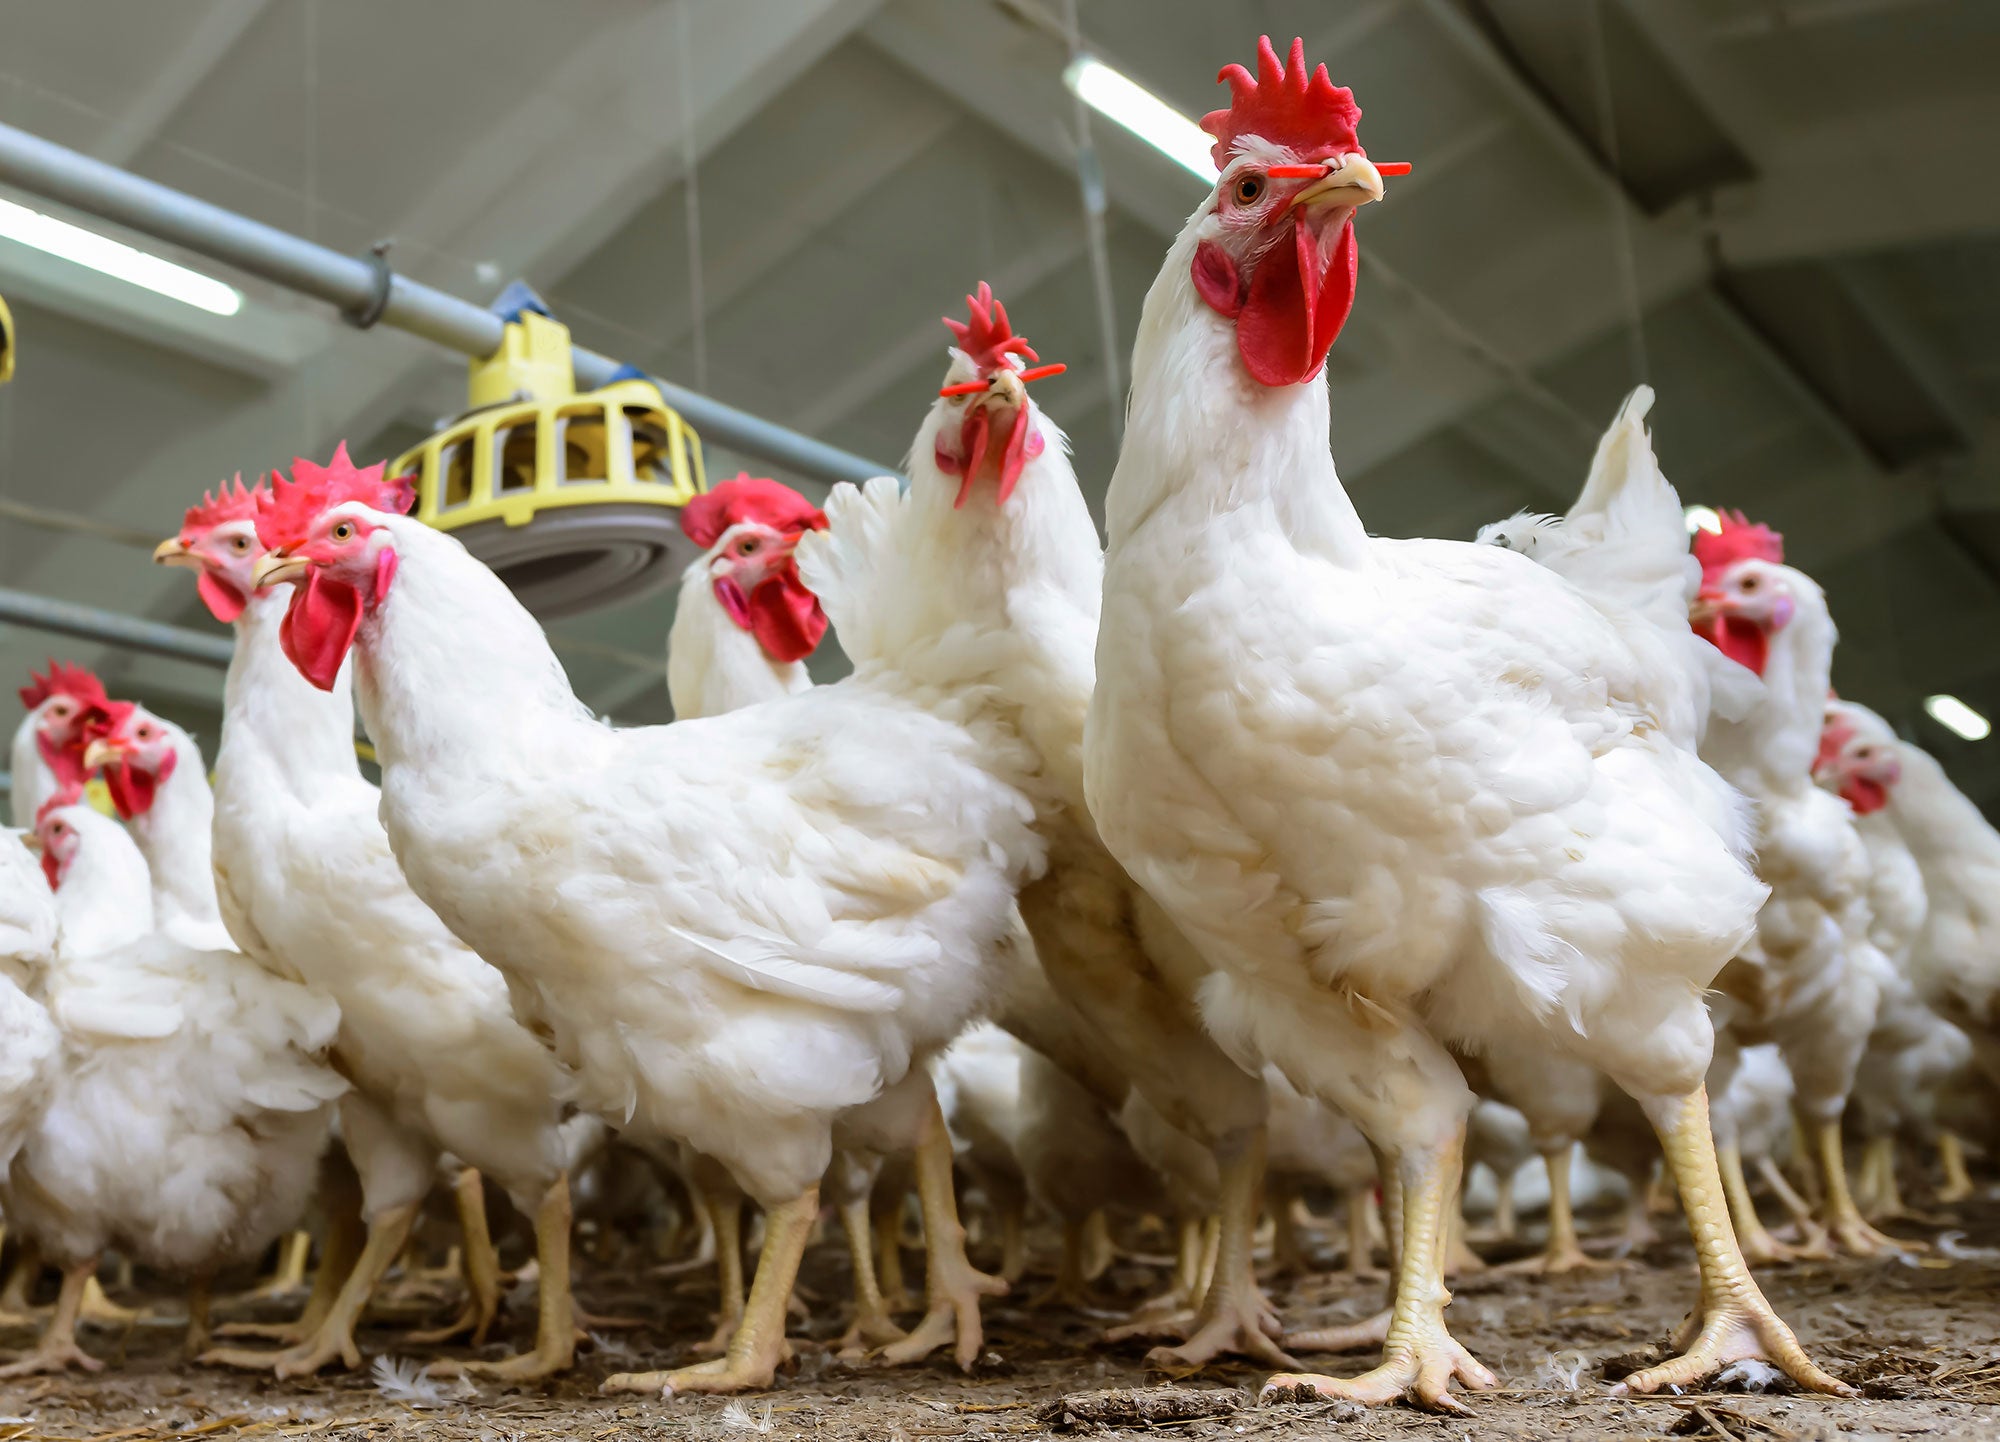 What research goes into large-scale poultry farming? | AGDAILY